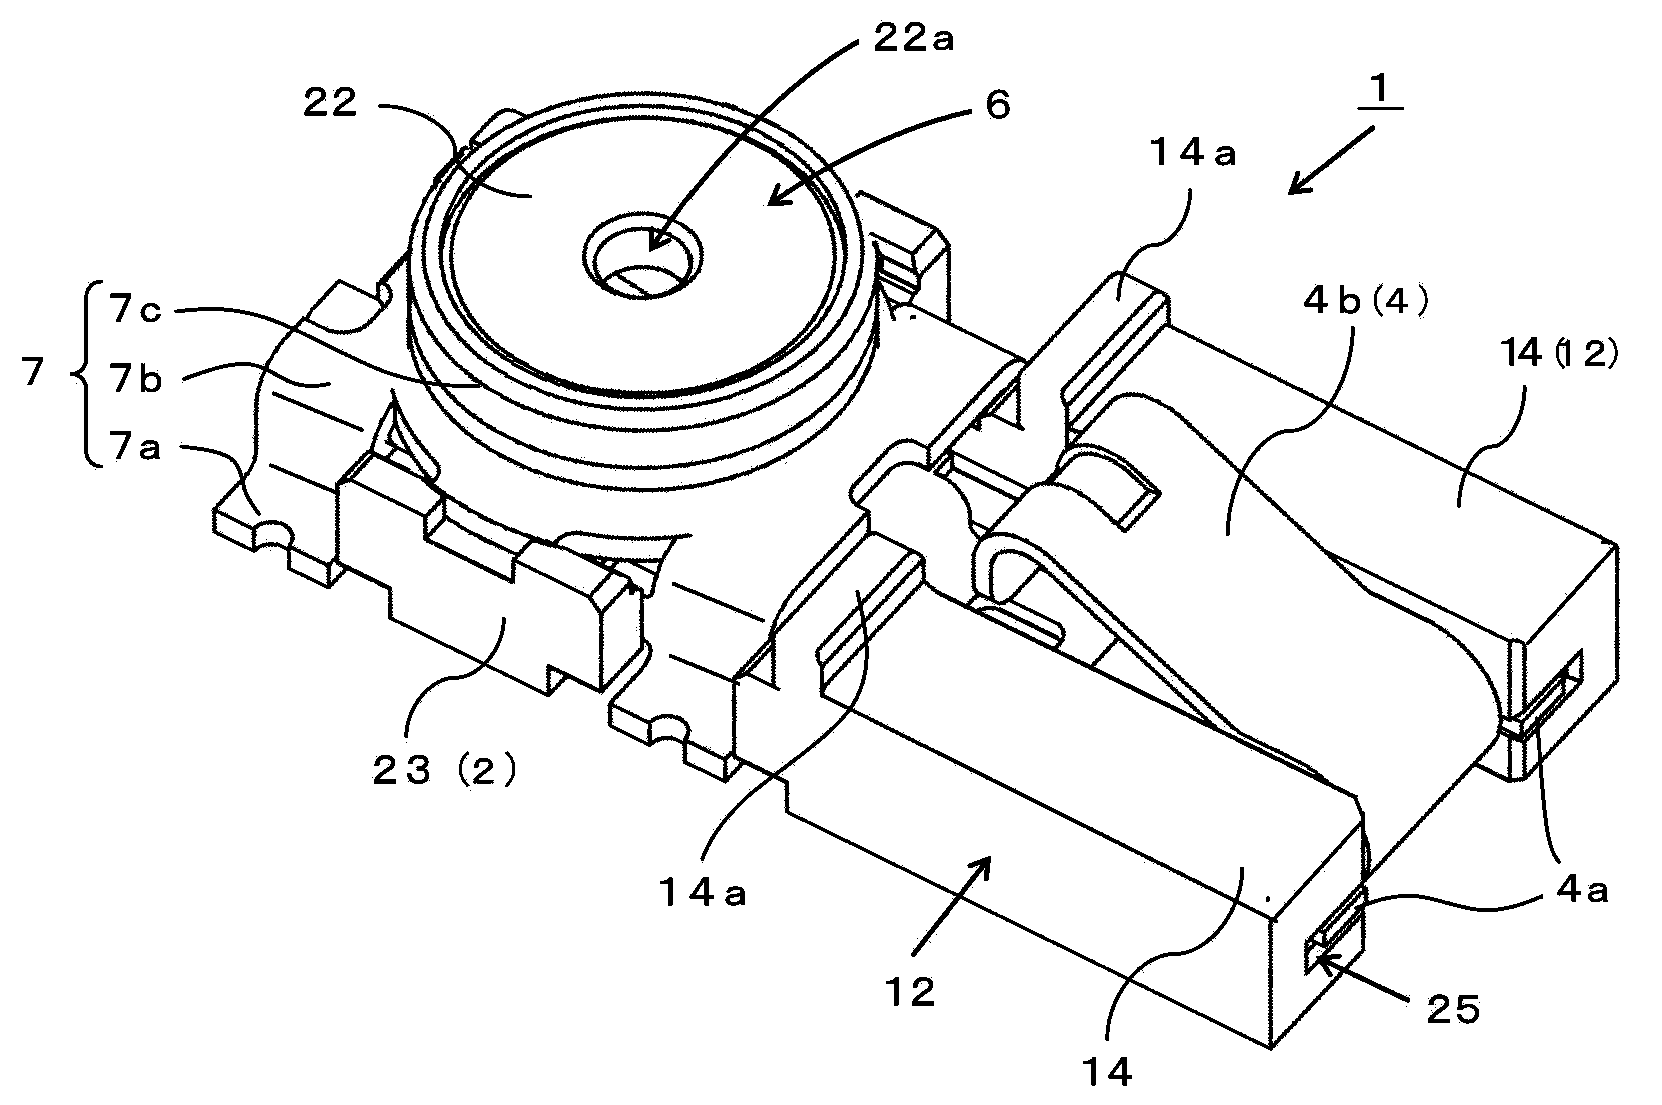 Antenna connecting and switching device